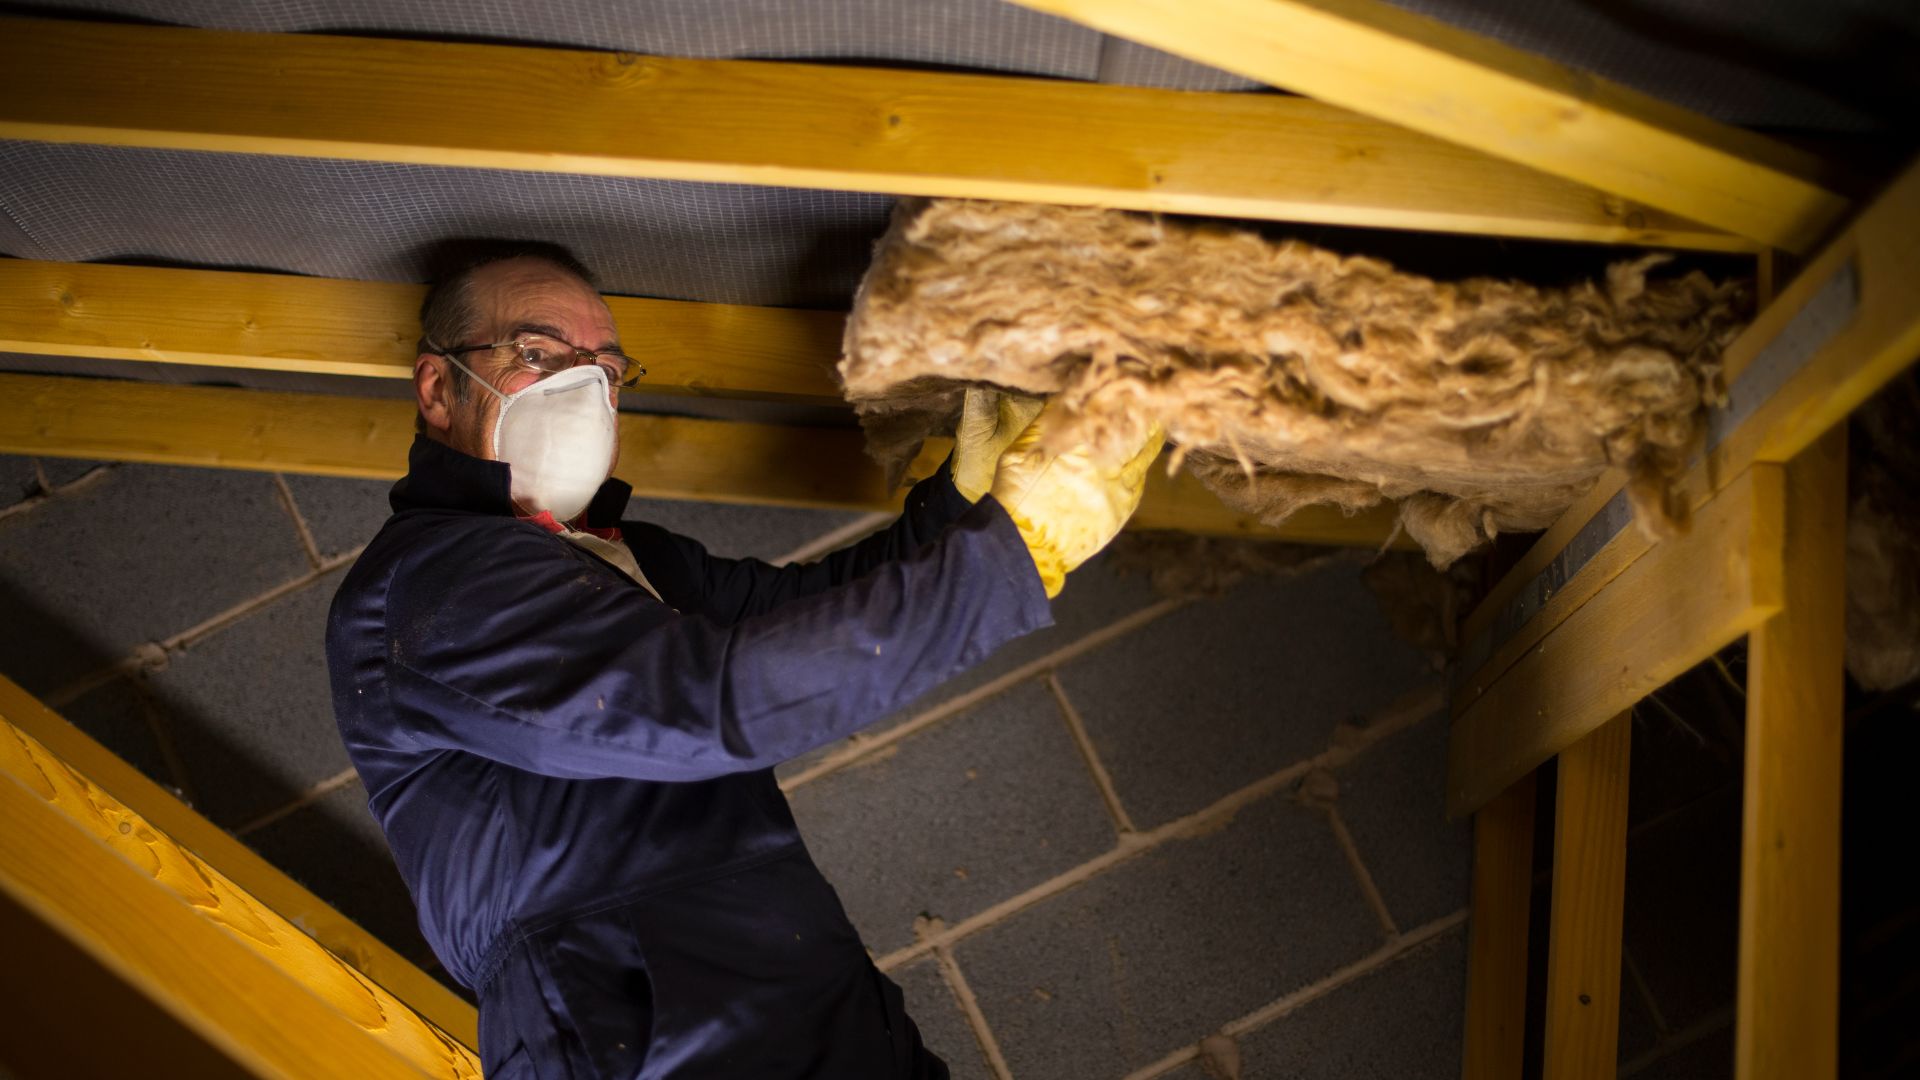 Air sealing insulation, whether spray foam or loose fill fiberglass, will improve energy efficiency